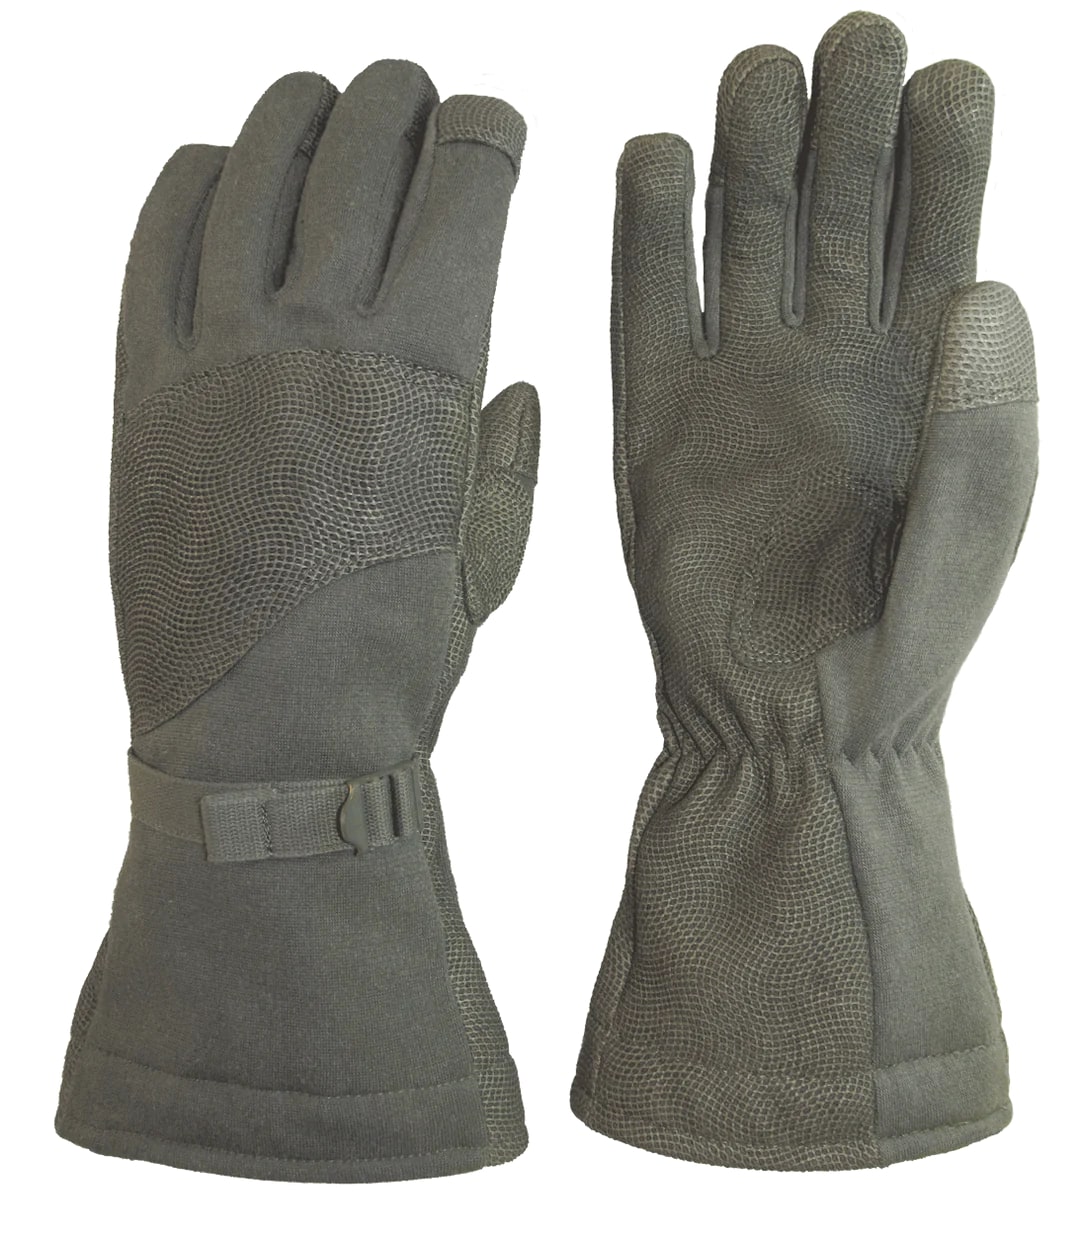 This image portrays Flyers - Cold Weather Glove by Government Suppliers & Associates.